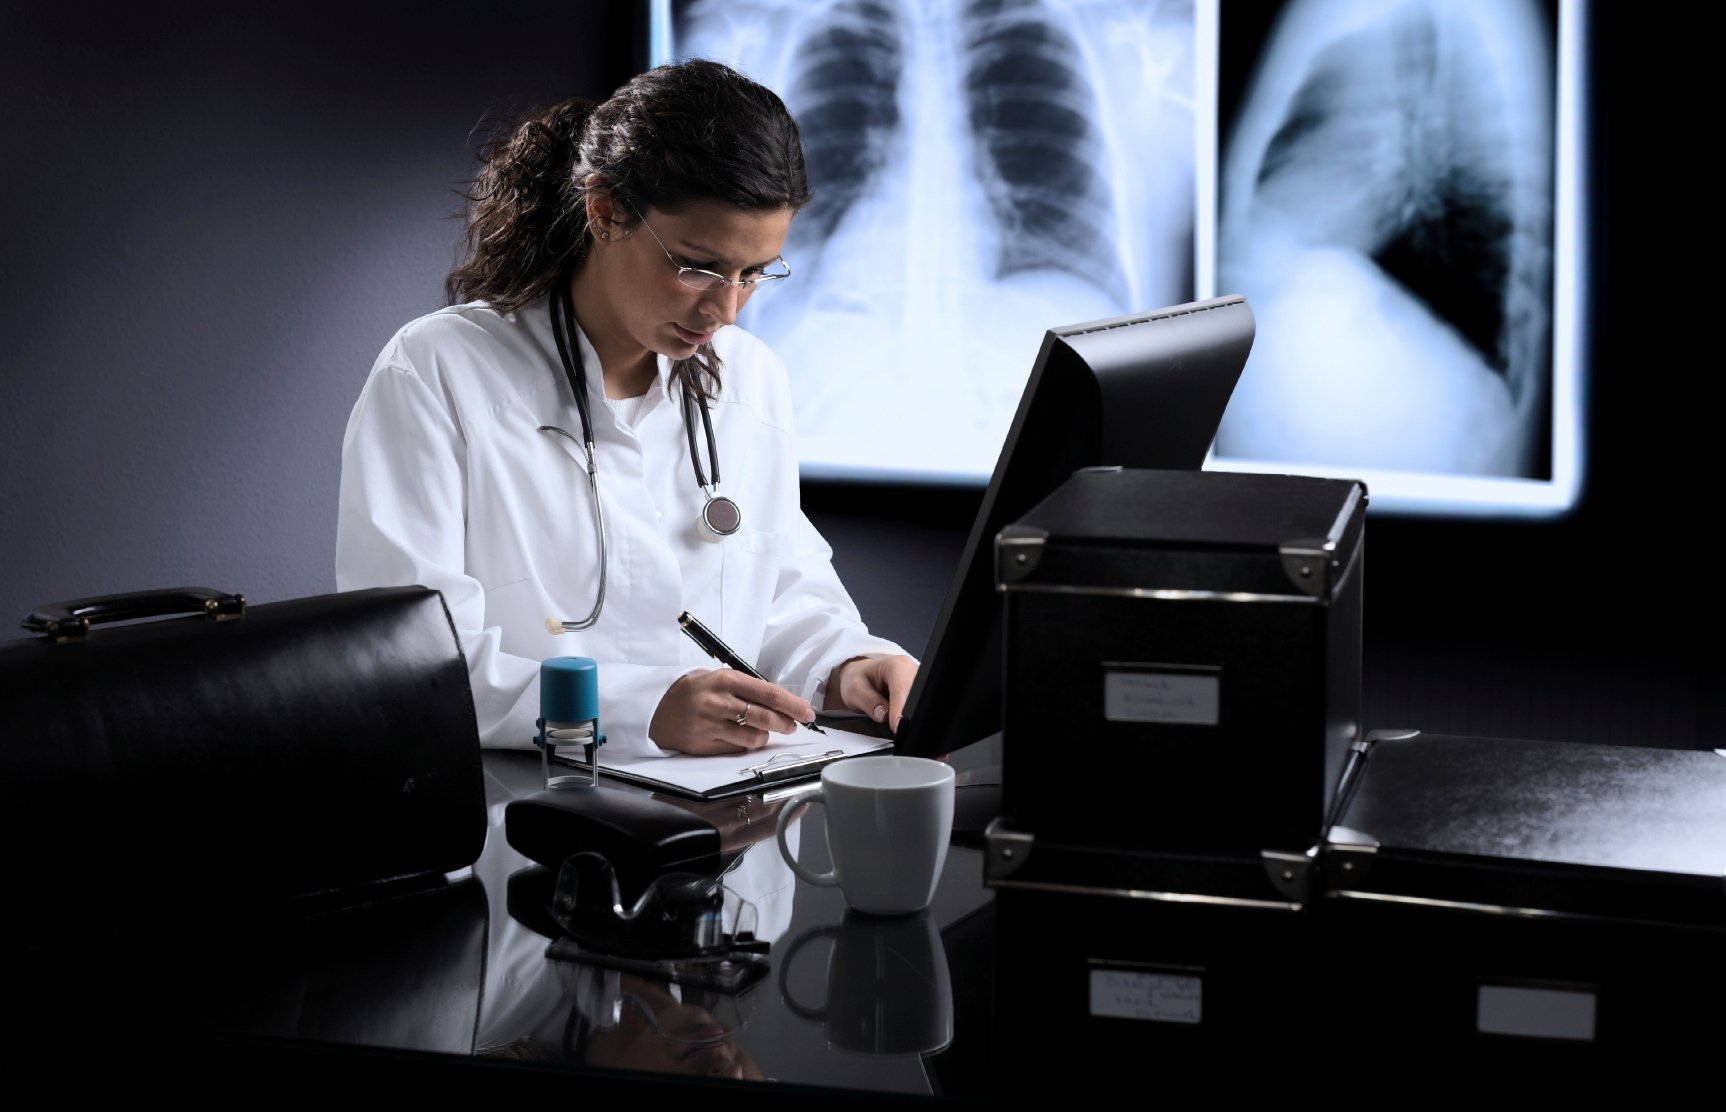 In today’s digital environment, a radiologist only sees images saved and shared to the PACS, so a firm understanding of X-ray reject rates is crucial for high image quality and good workflow.